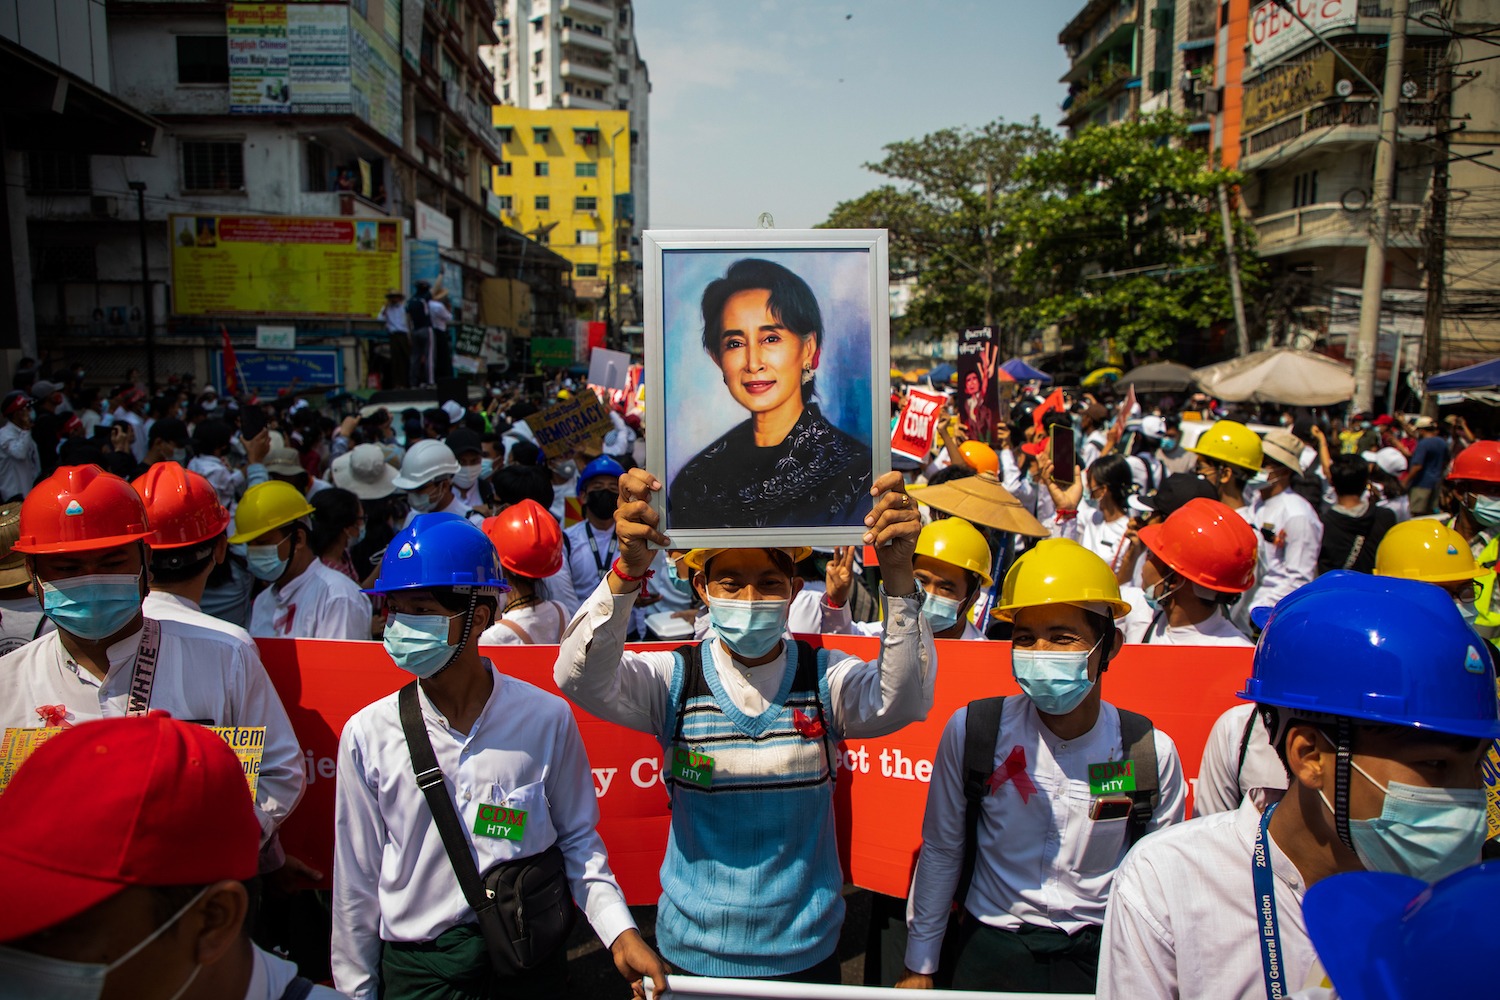 A protester holds a portrait of Aung San Suu Kyi during a demonstration against the junta in Yangon in February 2021. (Frontier)